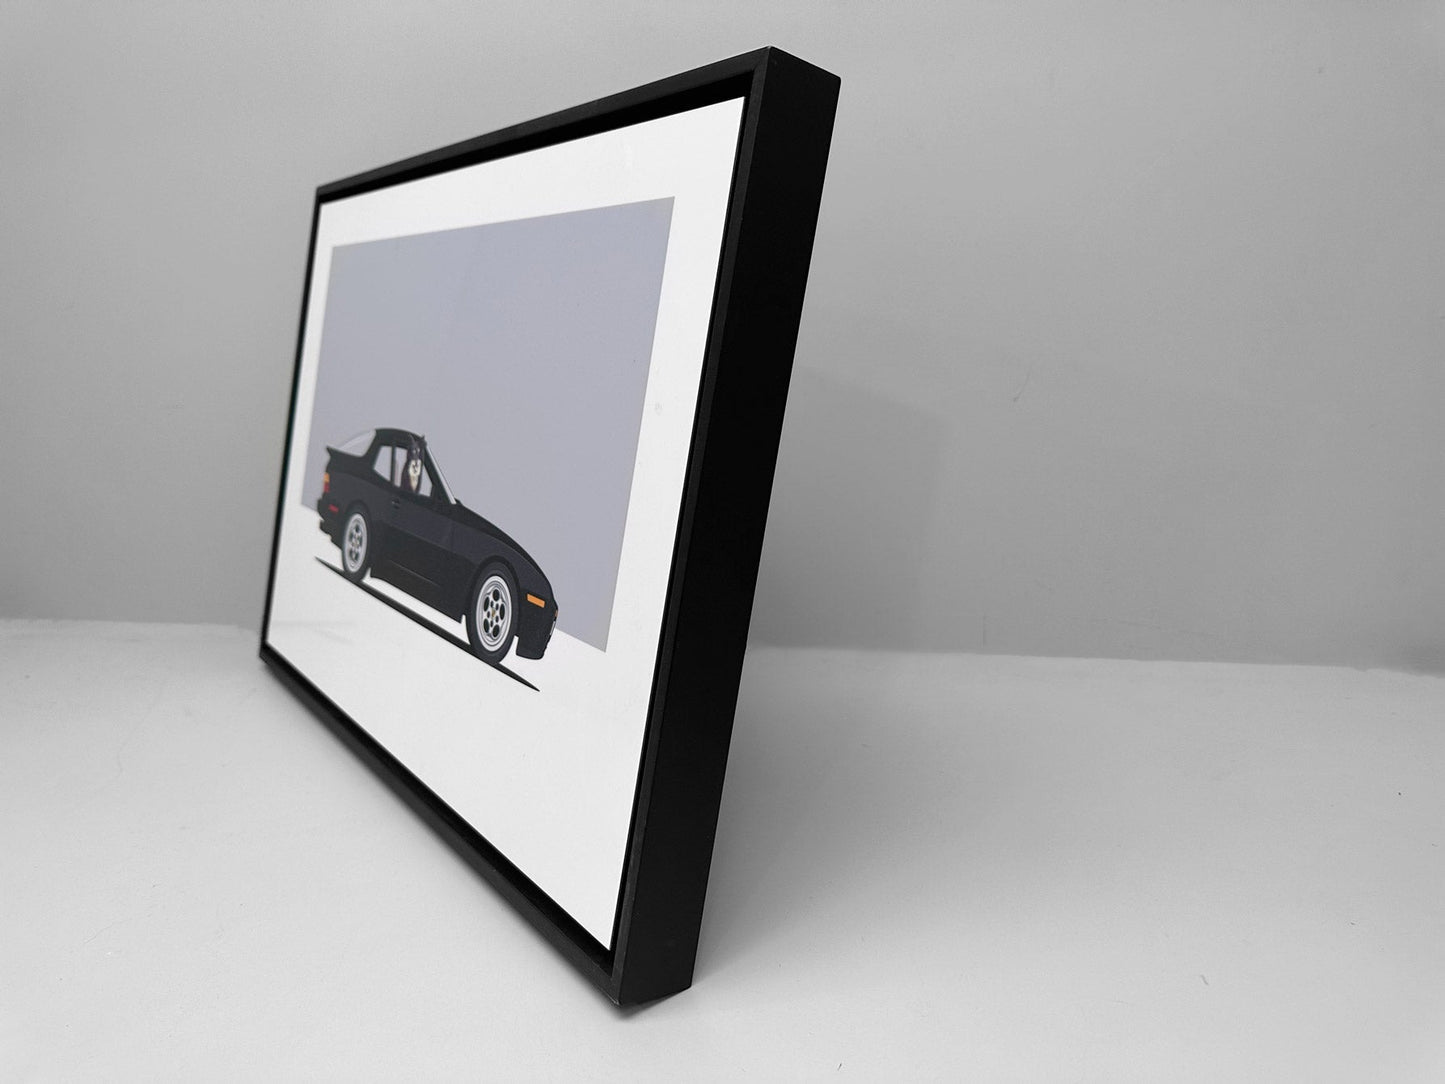 Satin Finish HD Metal Print in Black Wood Float Frame - 28x28 inches - 35% OFF!  - Only 2 Available.